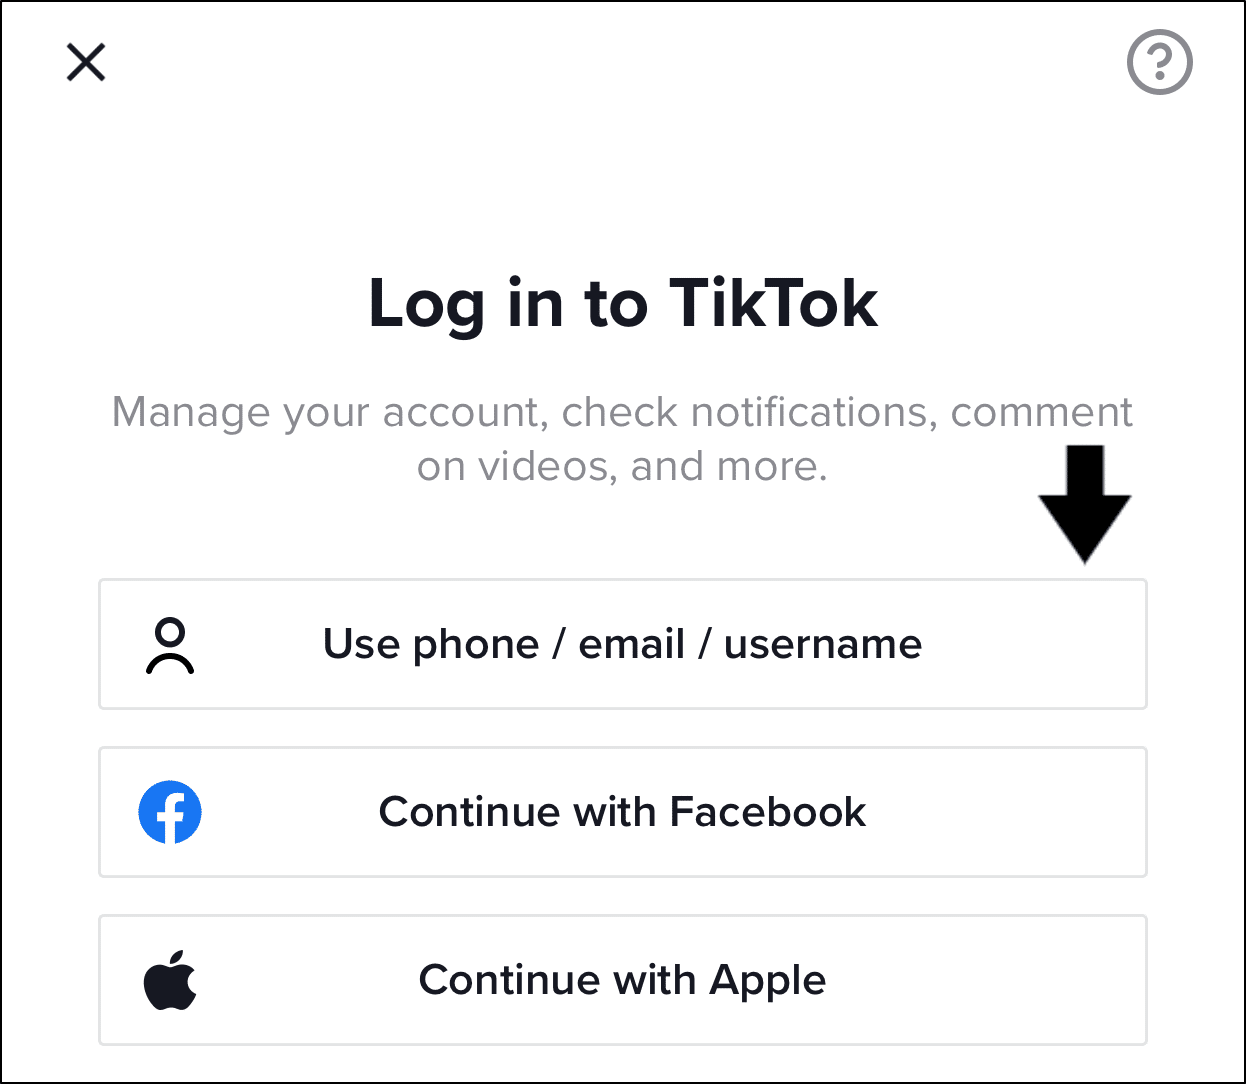 log in to TikTok using phone number, email or username to change account password to fix can't log in to TikTok, "Too many attempts, please try again" error message, or login failed